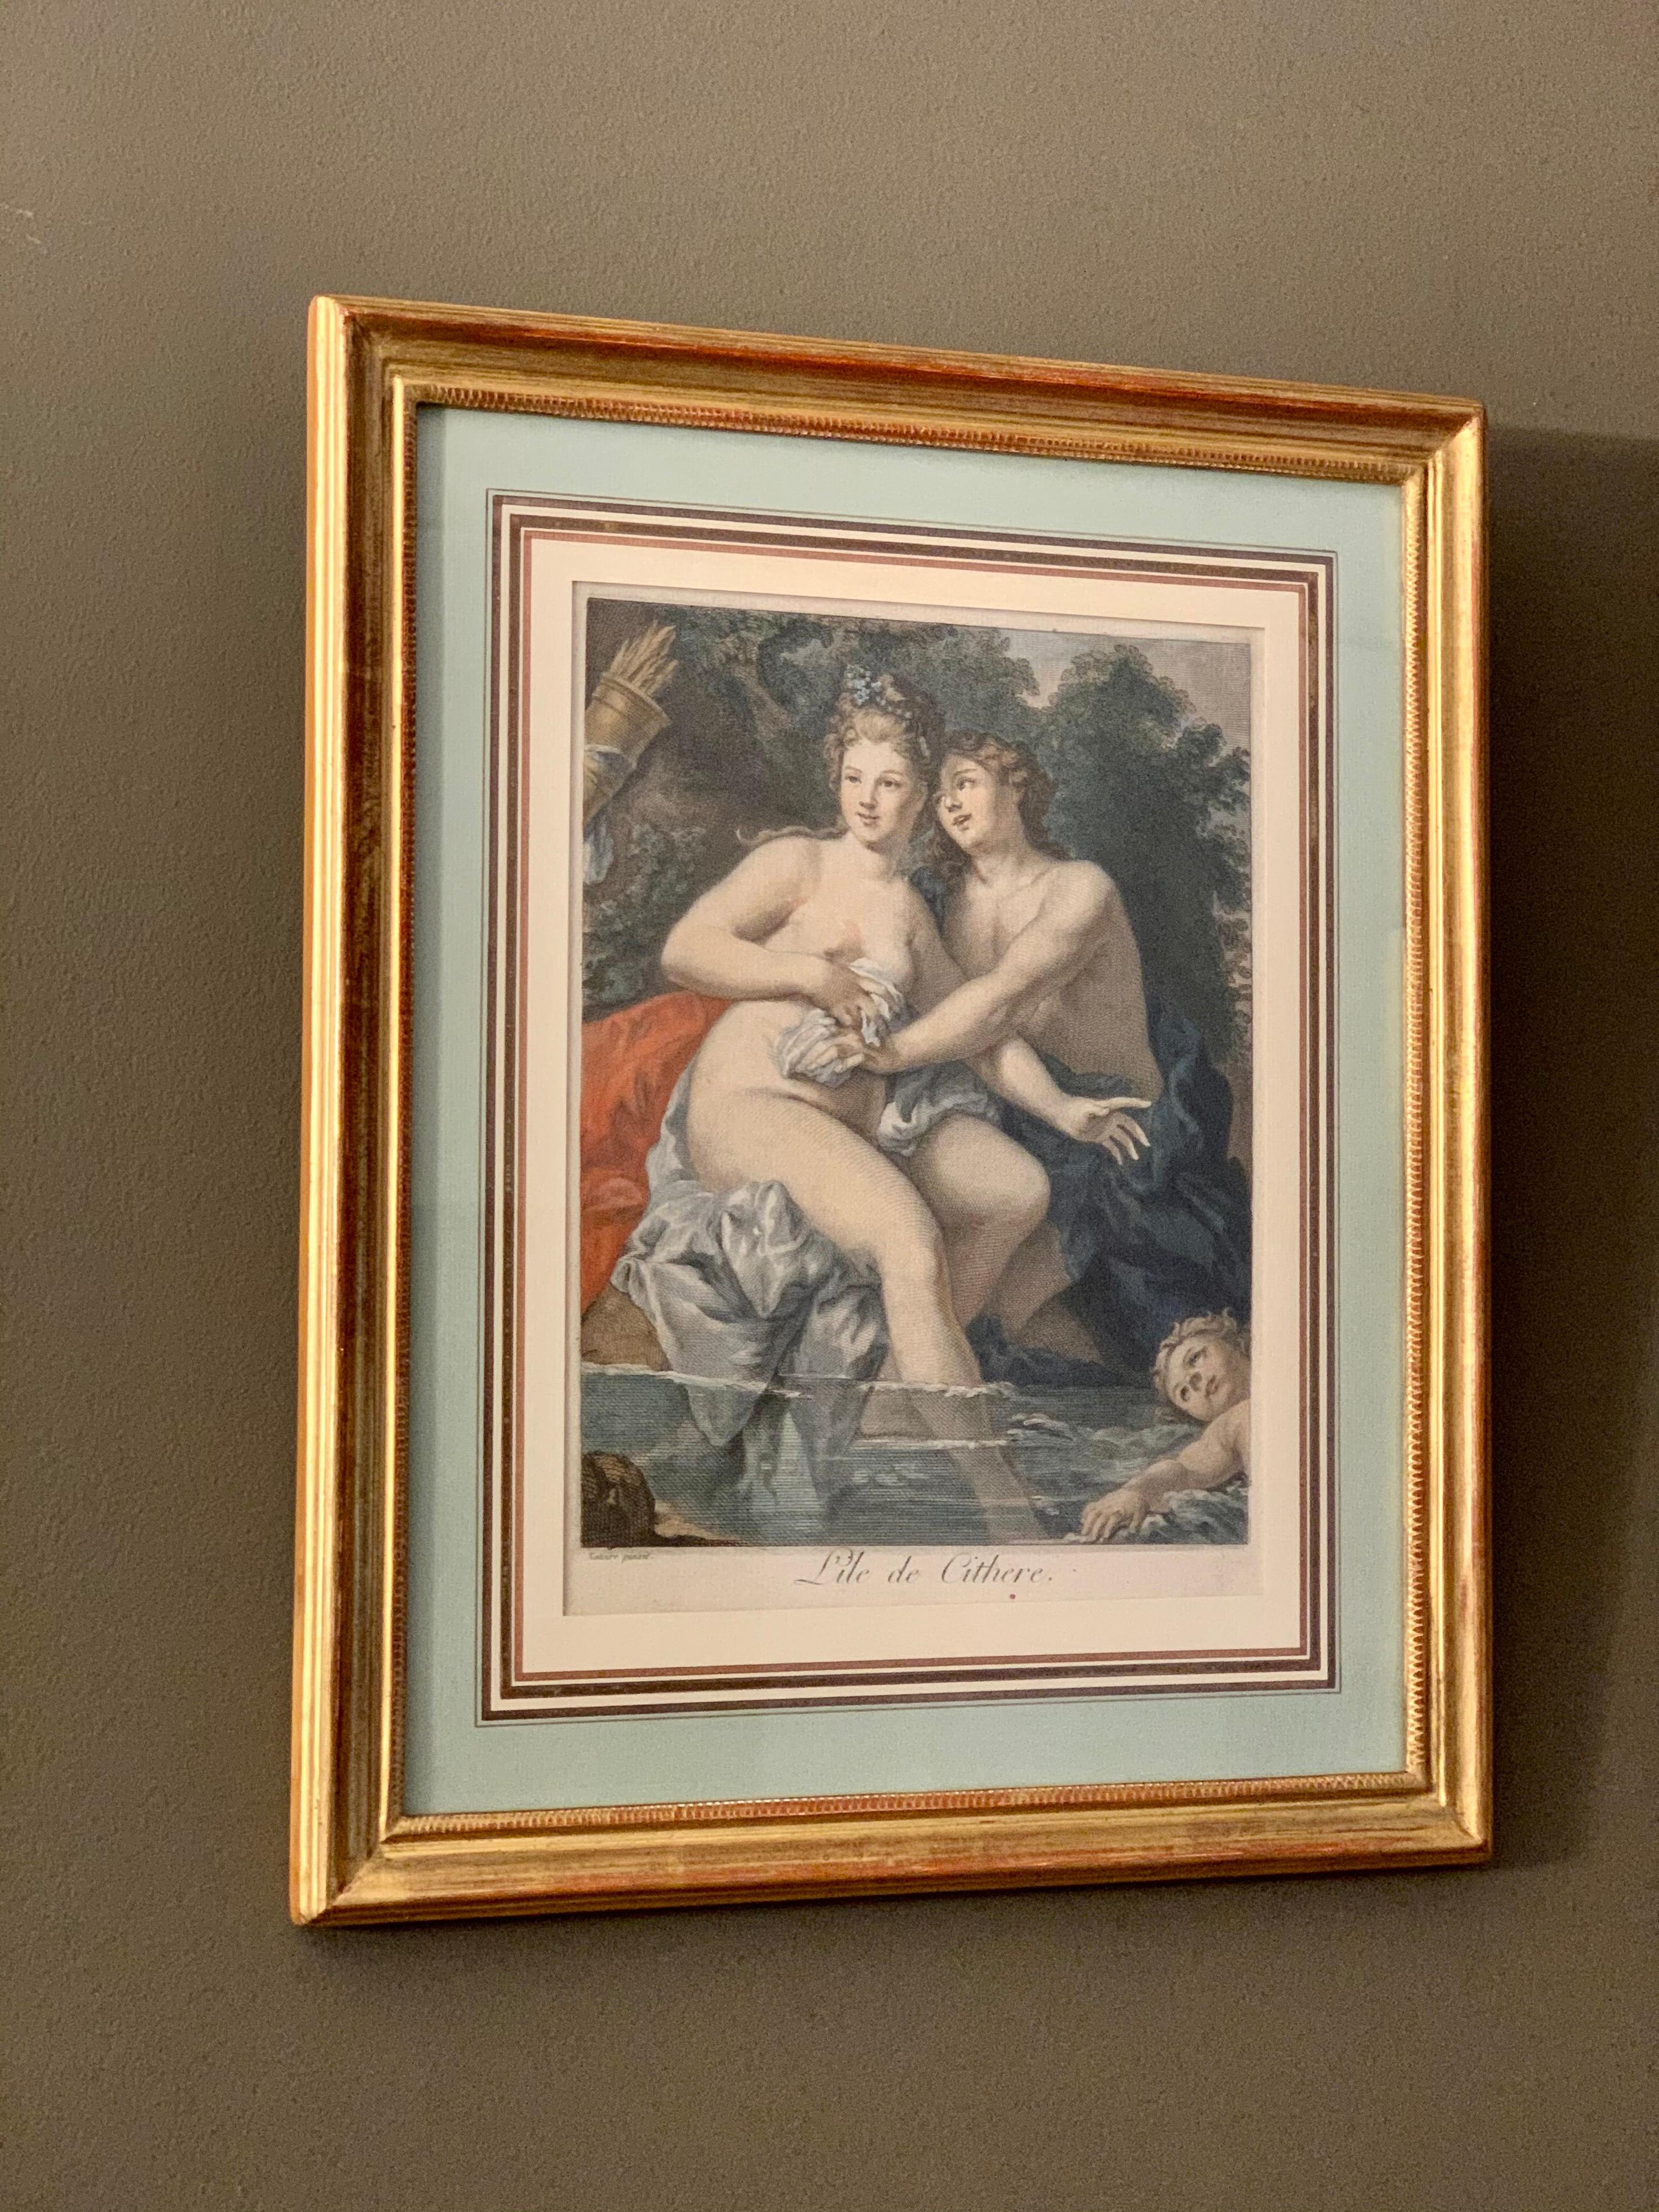 Pair of very fine 18th century mythological engravings based on magnificent paintings created by French artist Charles Joseph Natoire. 

These beautiful French engravings are hand coloured and depict the 